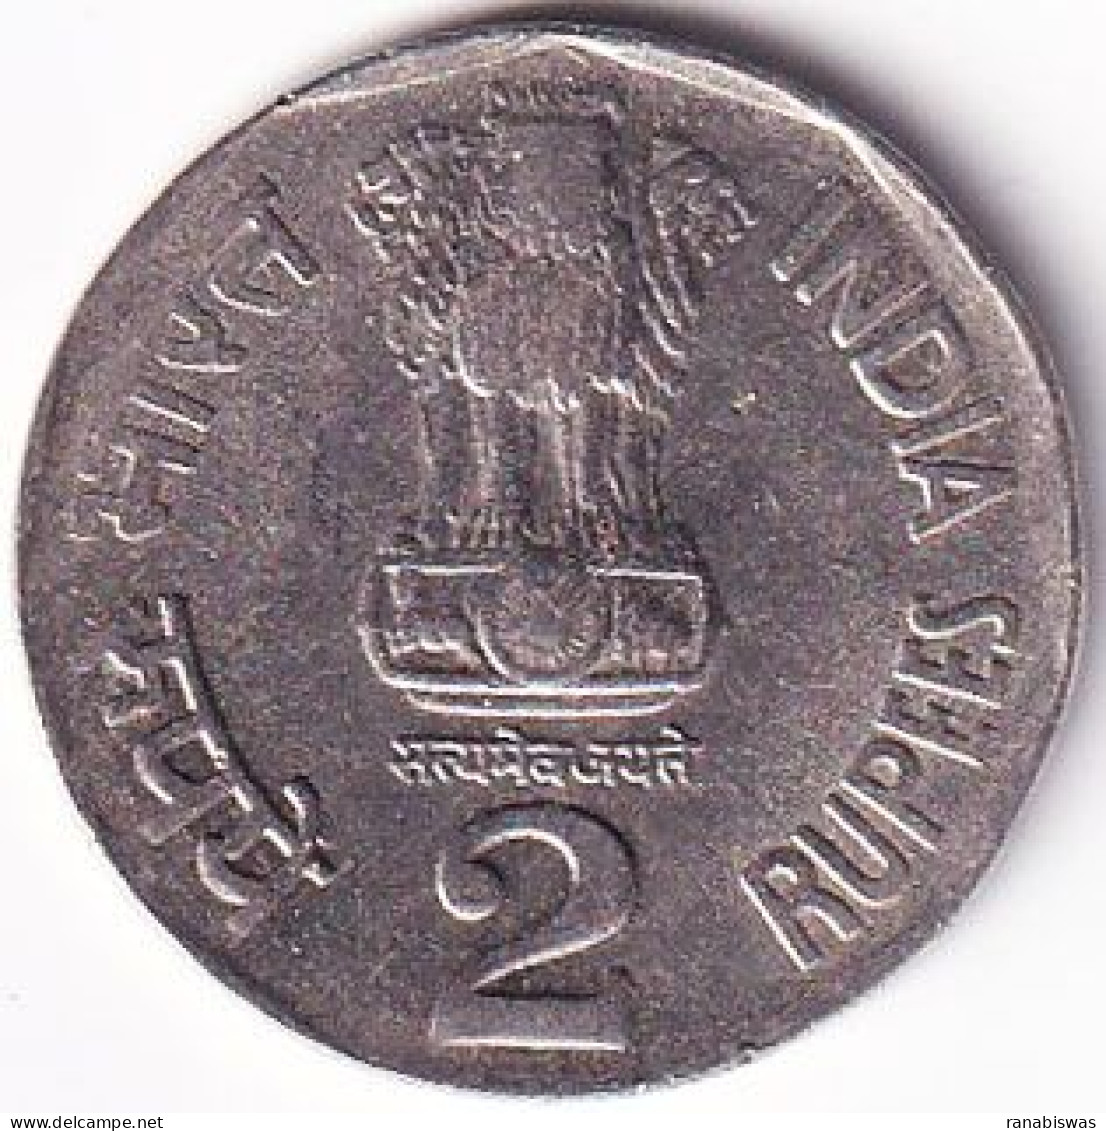 INDIA COIN LOT 36, 2 RUPEES 1993, WORLD FOOD DAY, FAO, HYDERABAD MINT, XF, SCARE - Indien